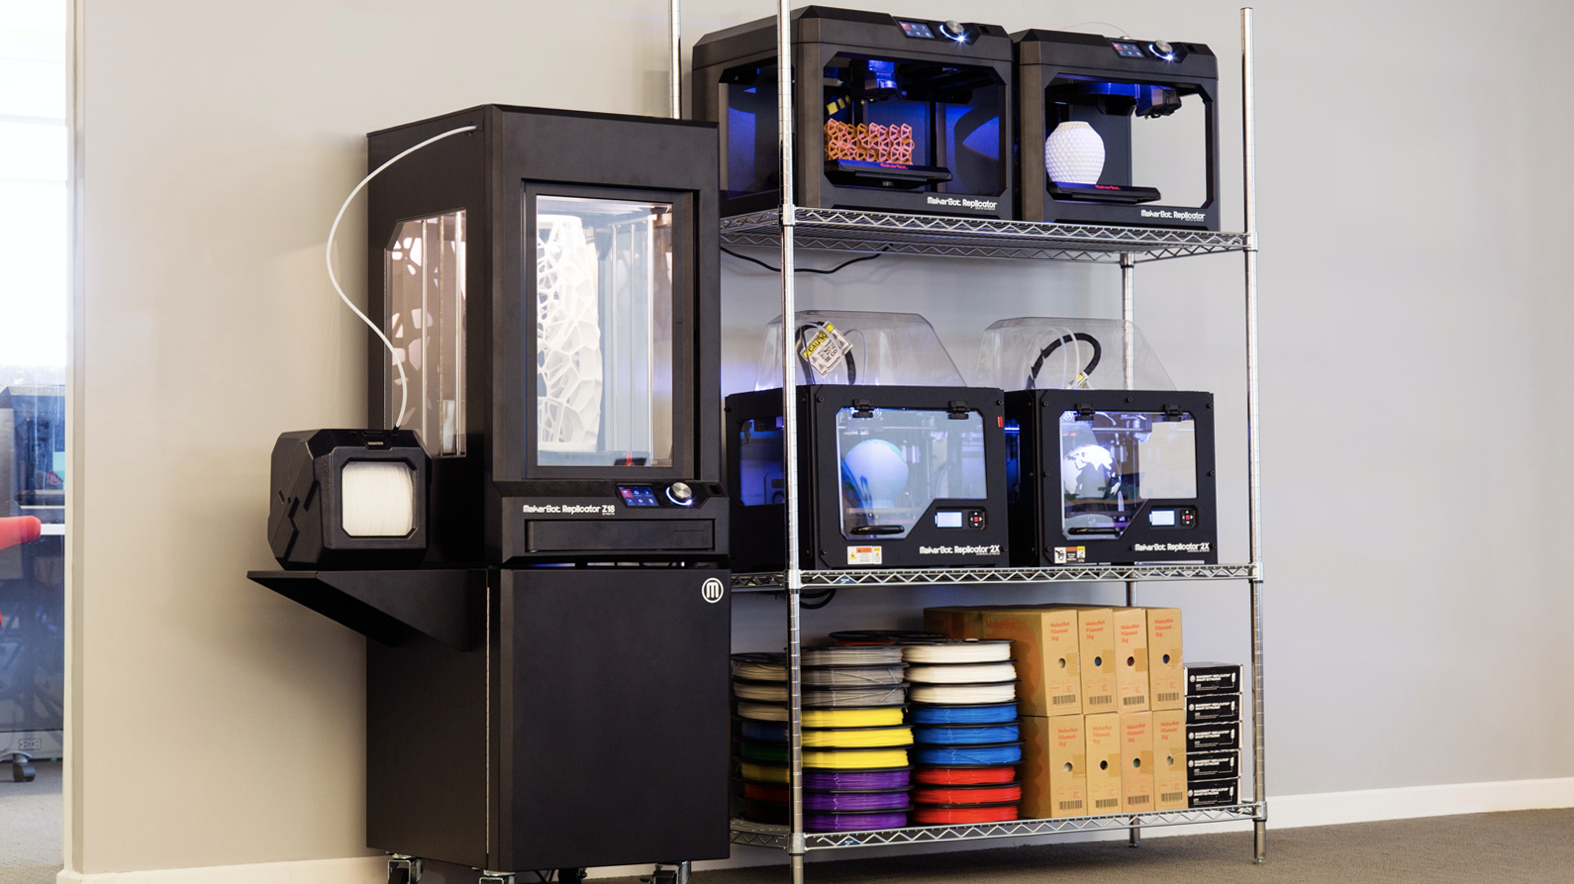 Makerbot makerspace